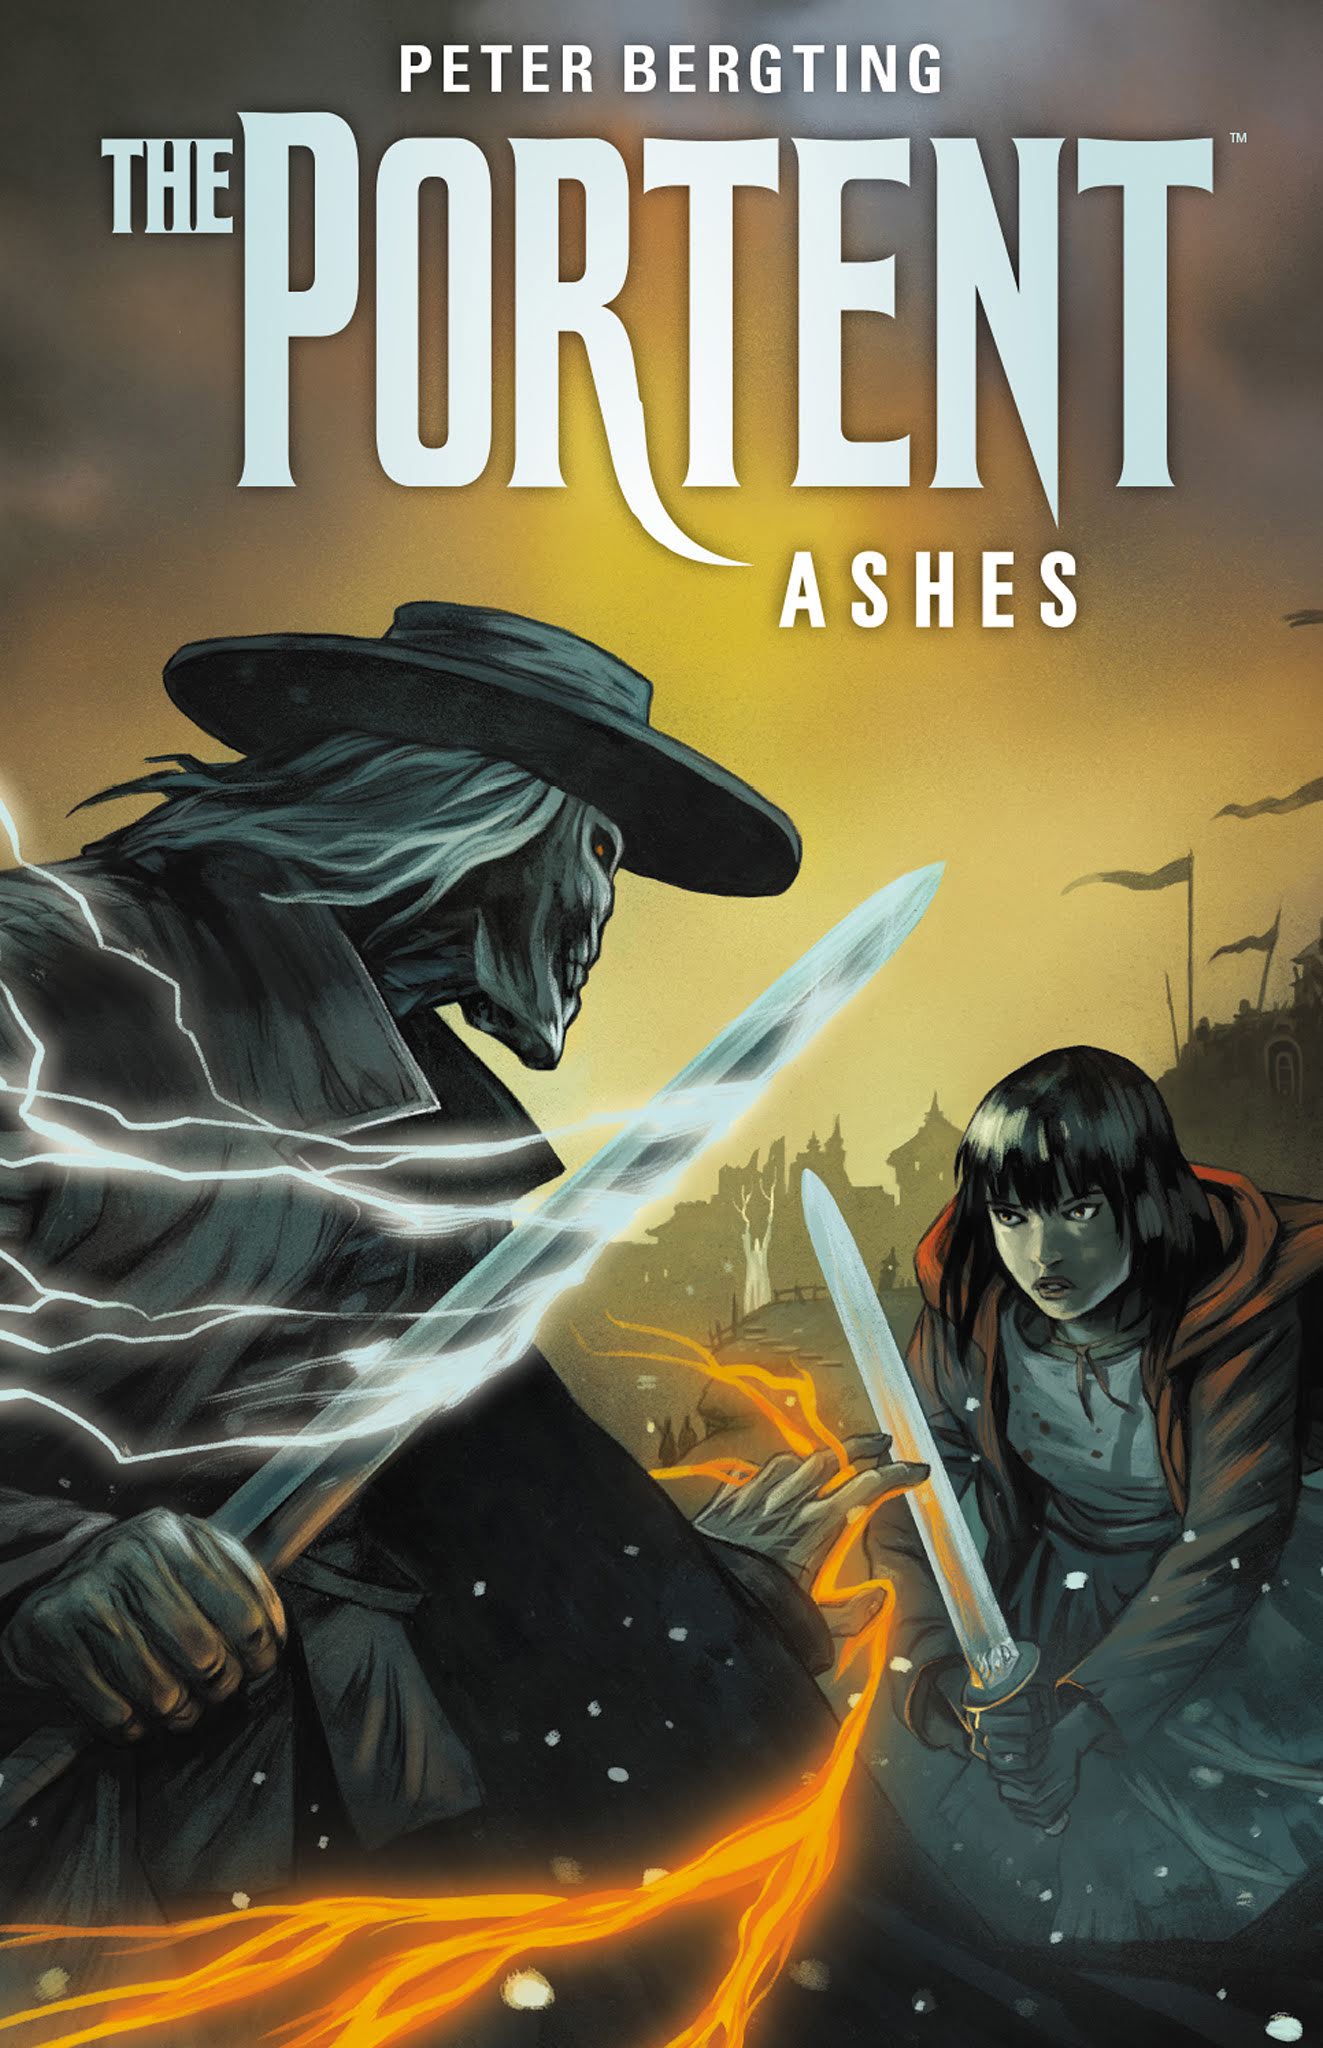 Read online The Portent: Ashes comic -  Issue # TPB - 1